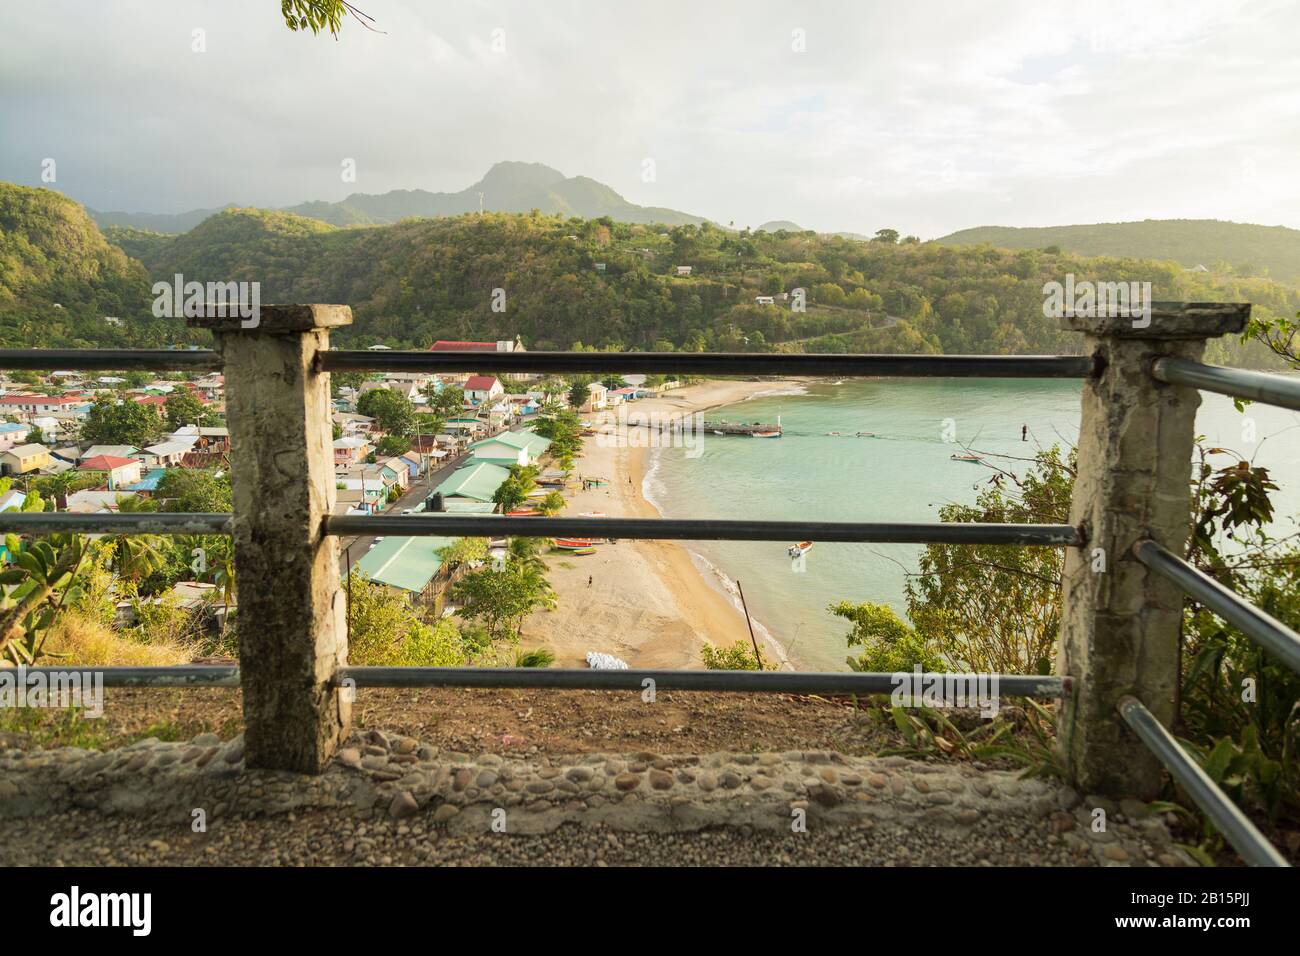 Enchanting rural fishing village of Anse La Raye in focus in the background and a popular view point out of focus in the foreground Stock Photo